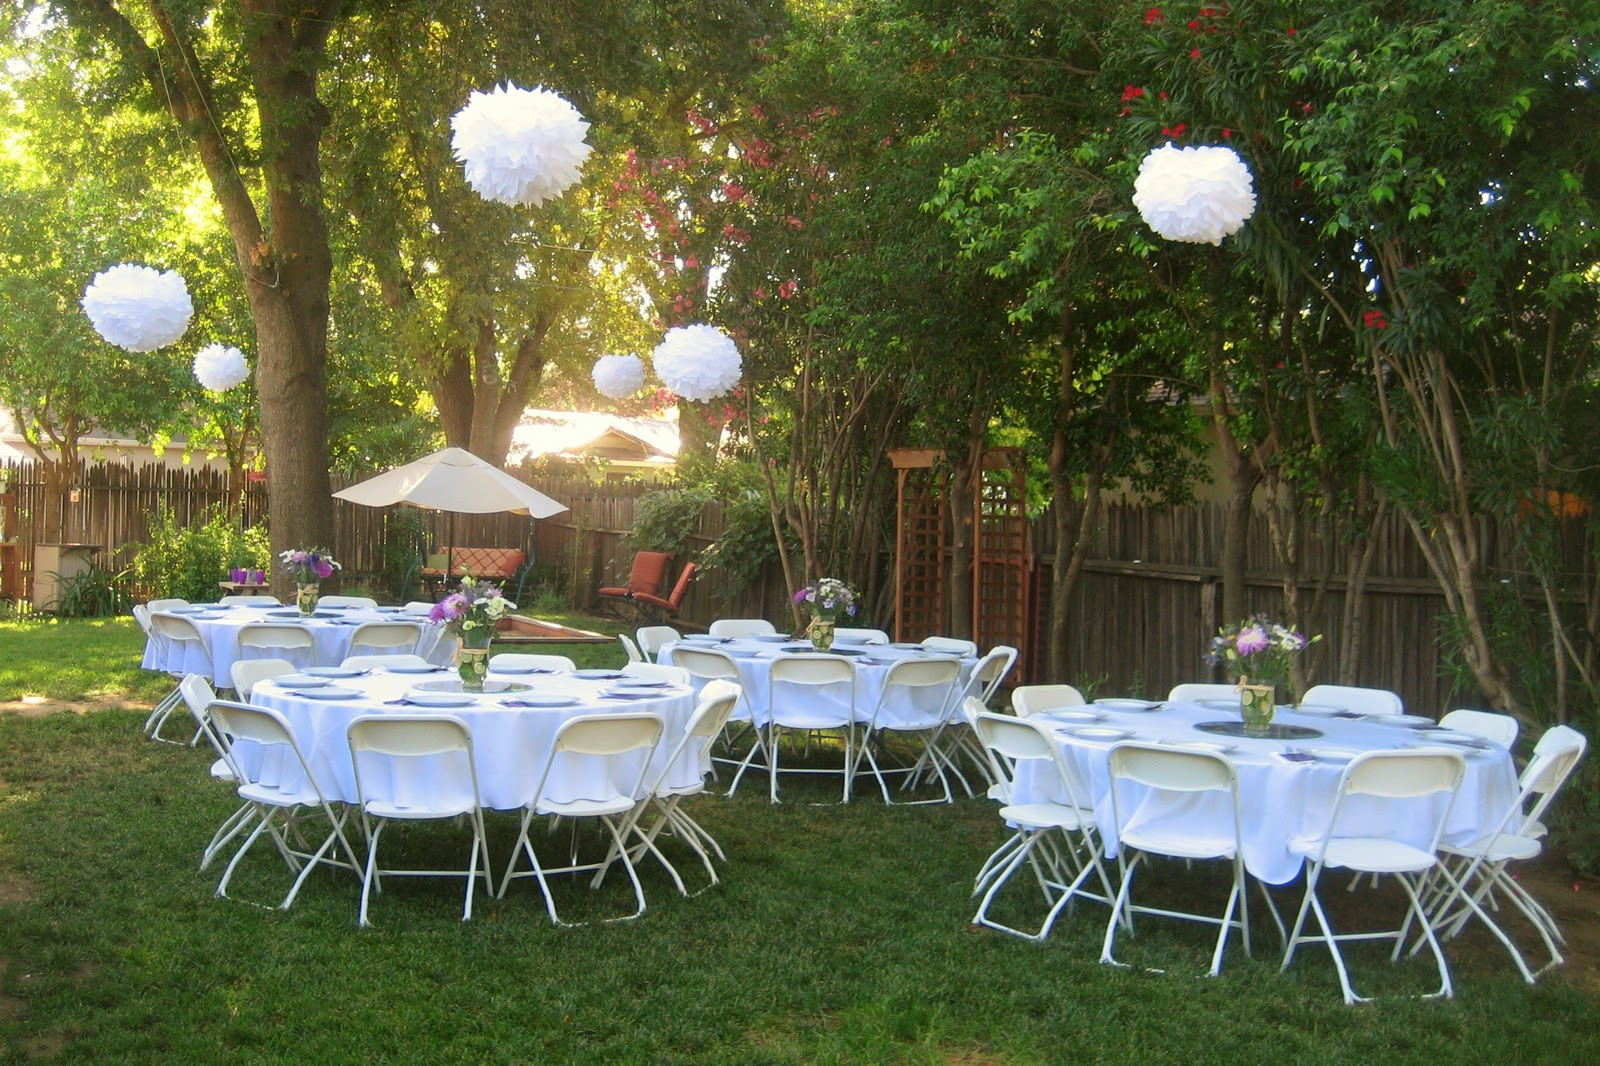 Outdoor Engagement Party Decoration Ideas
 A resting place for pleted Projects Backyard Bridal